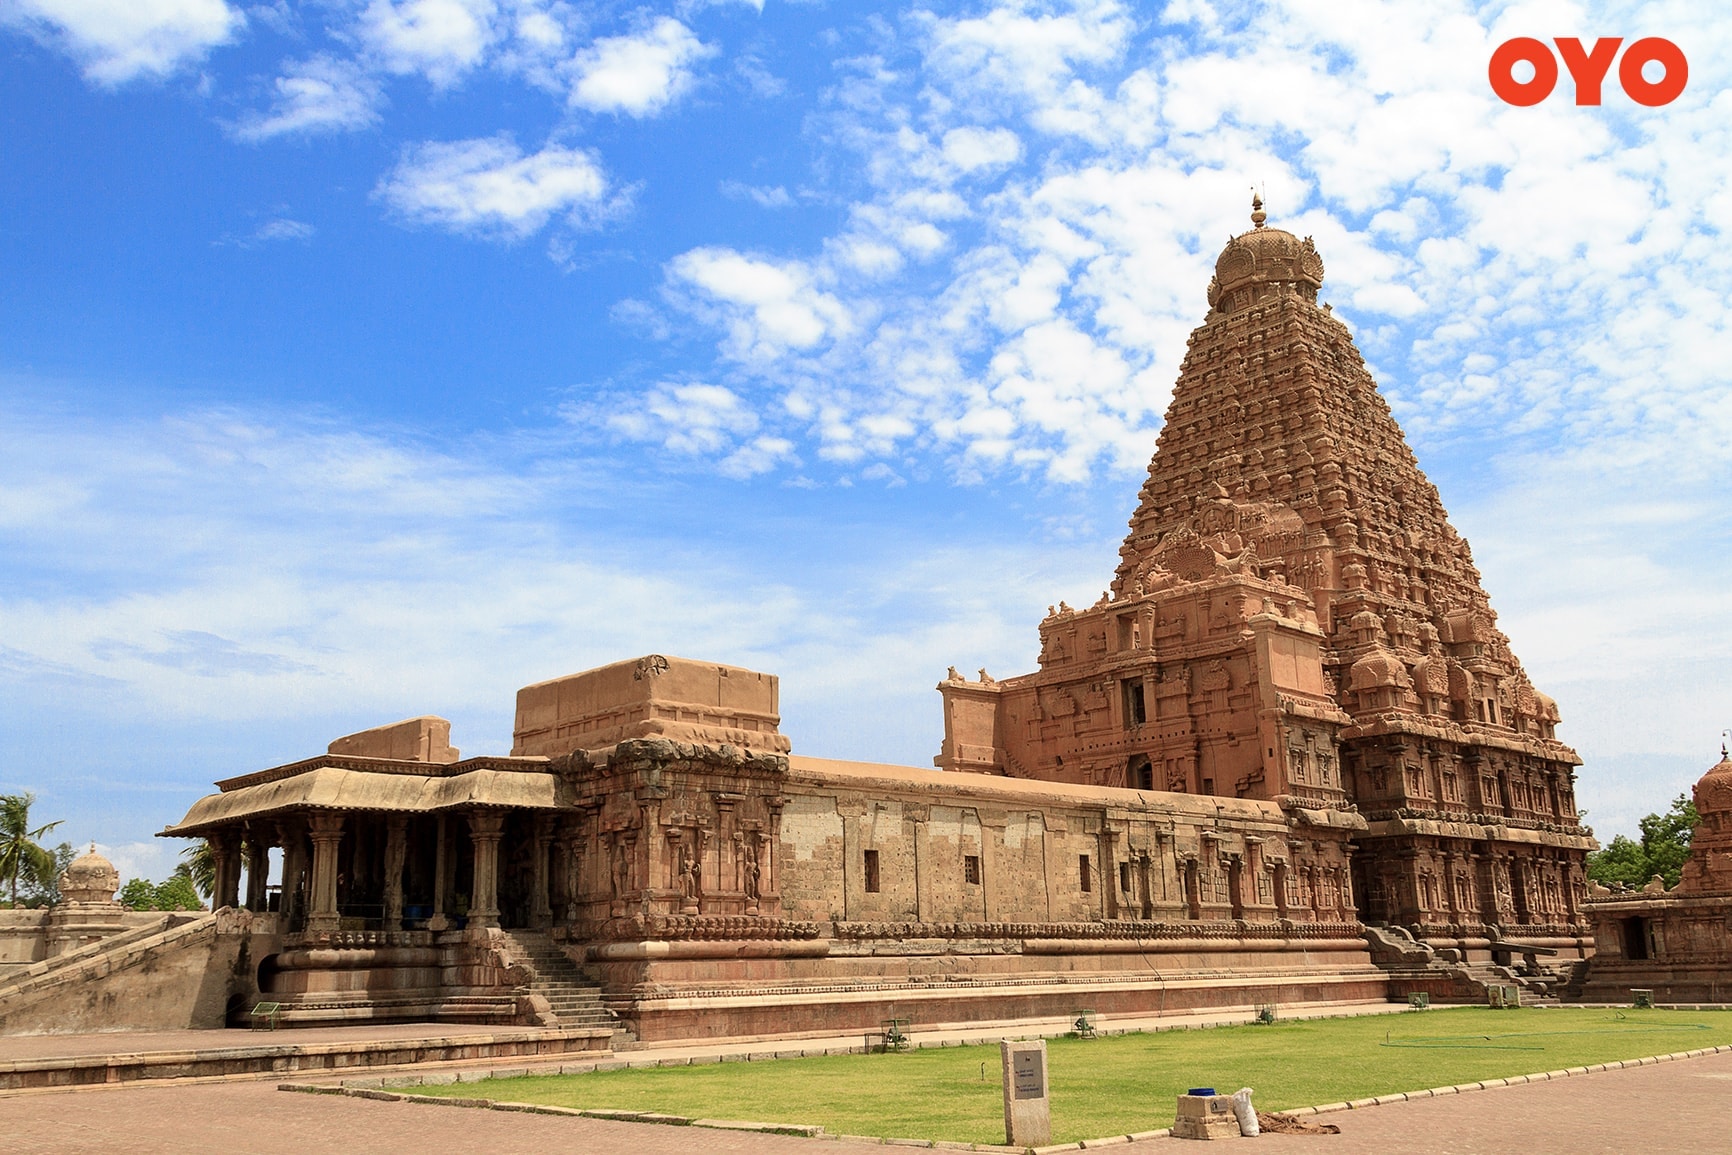 Brihadeshwara Temple, Thanjavur- One of the most famous temple of India